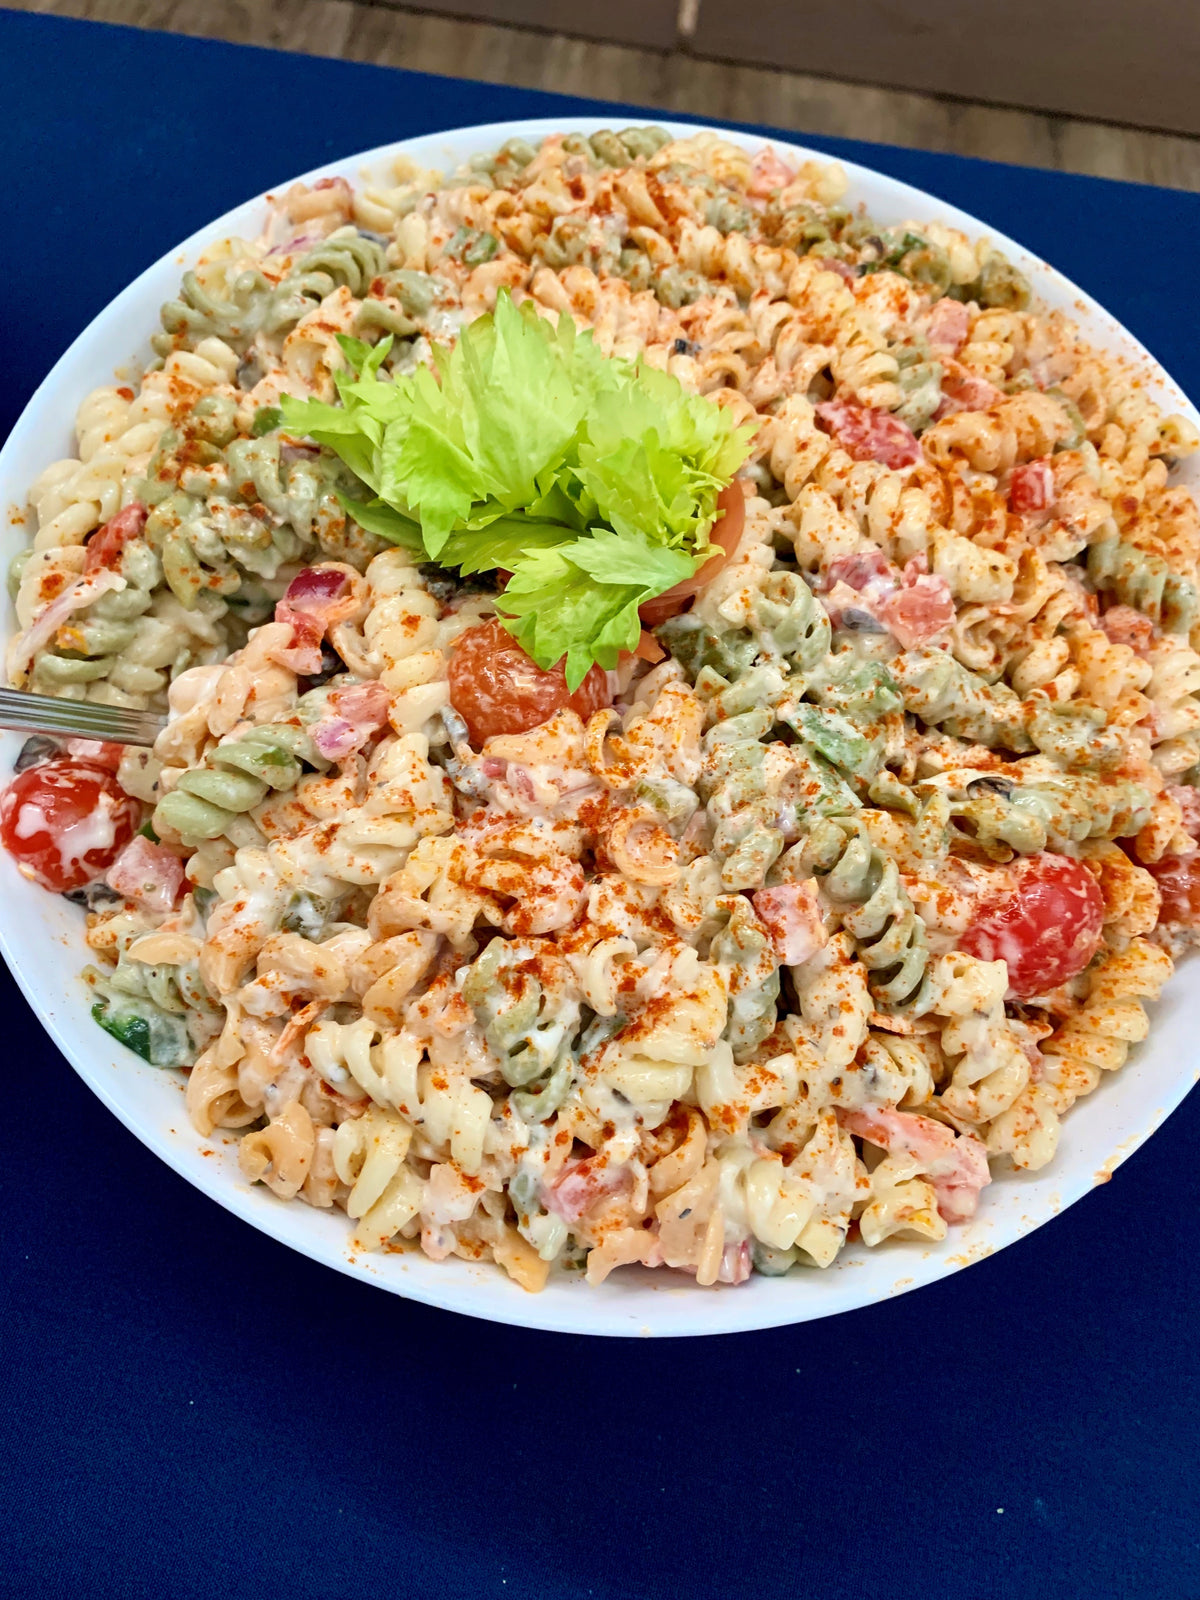 Pasta Salad by the Pound